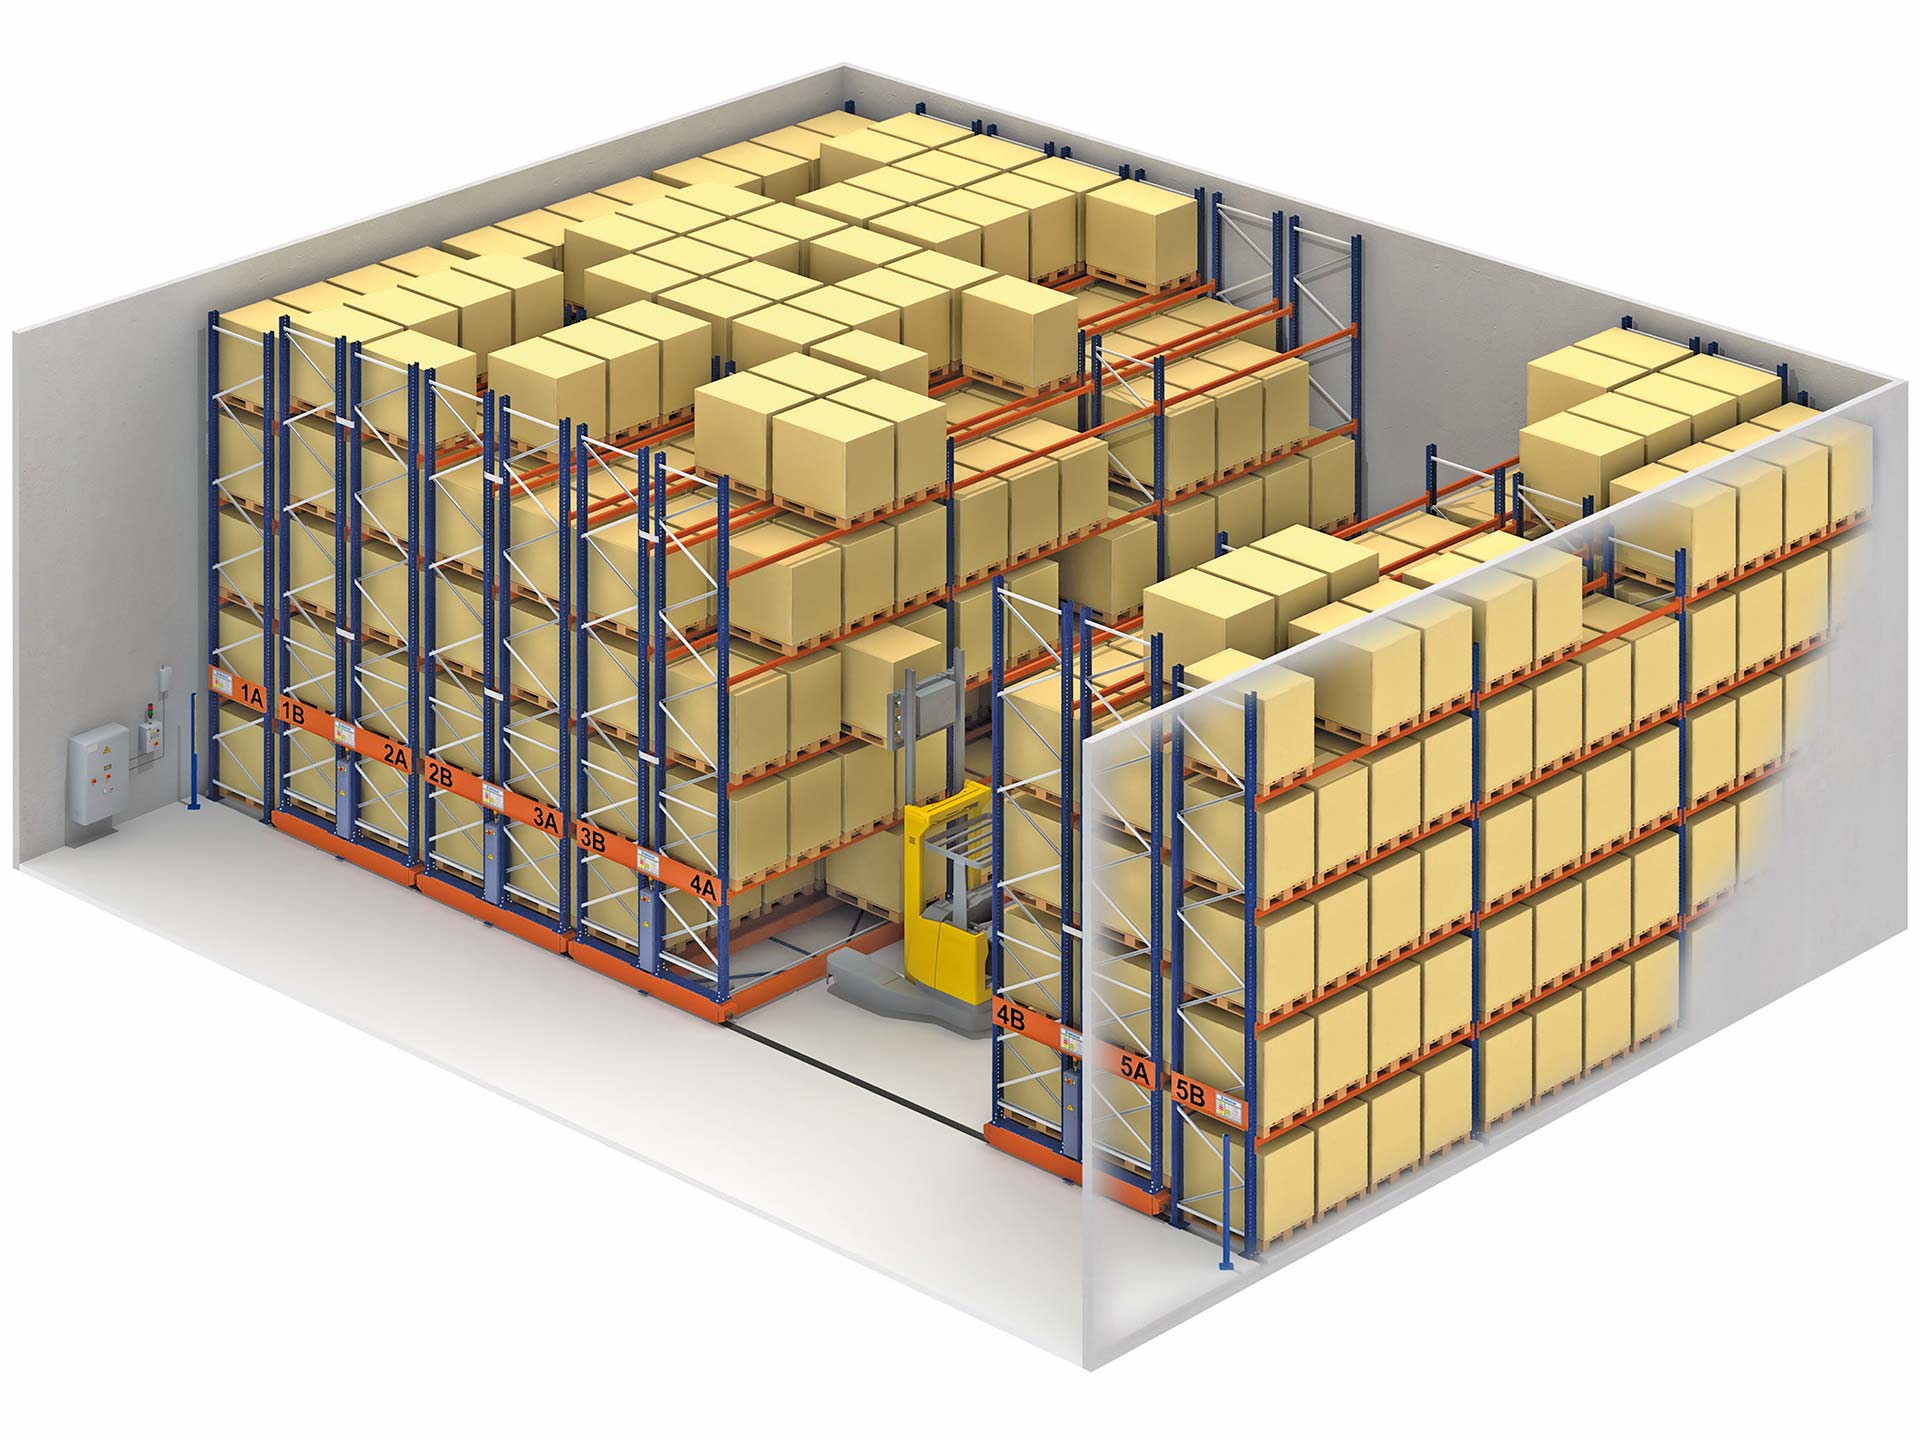 The Movirack system allows operators to maneuver forklift trucks to access the product when needed